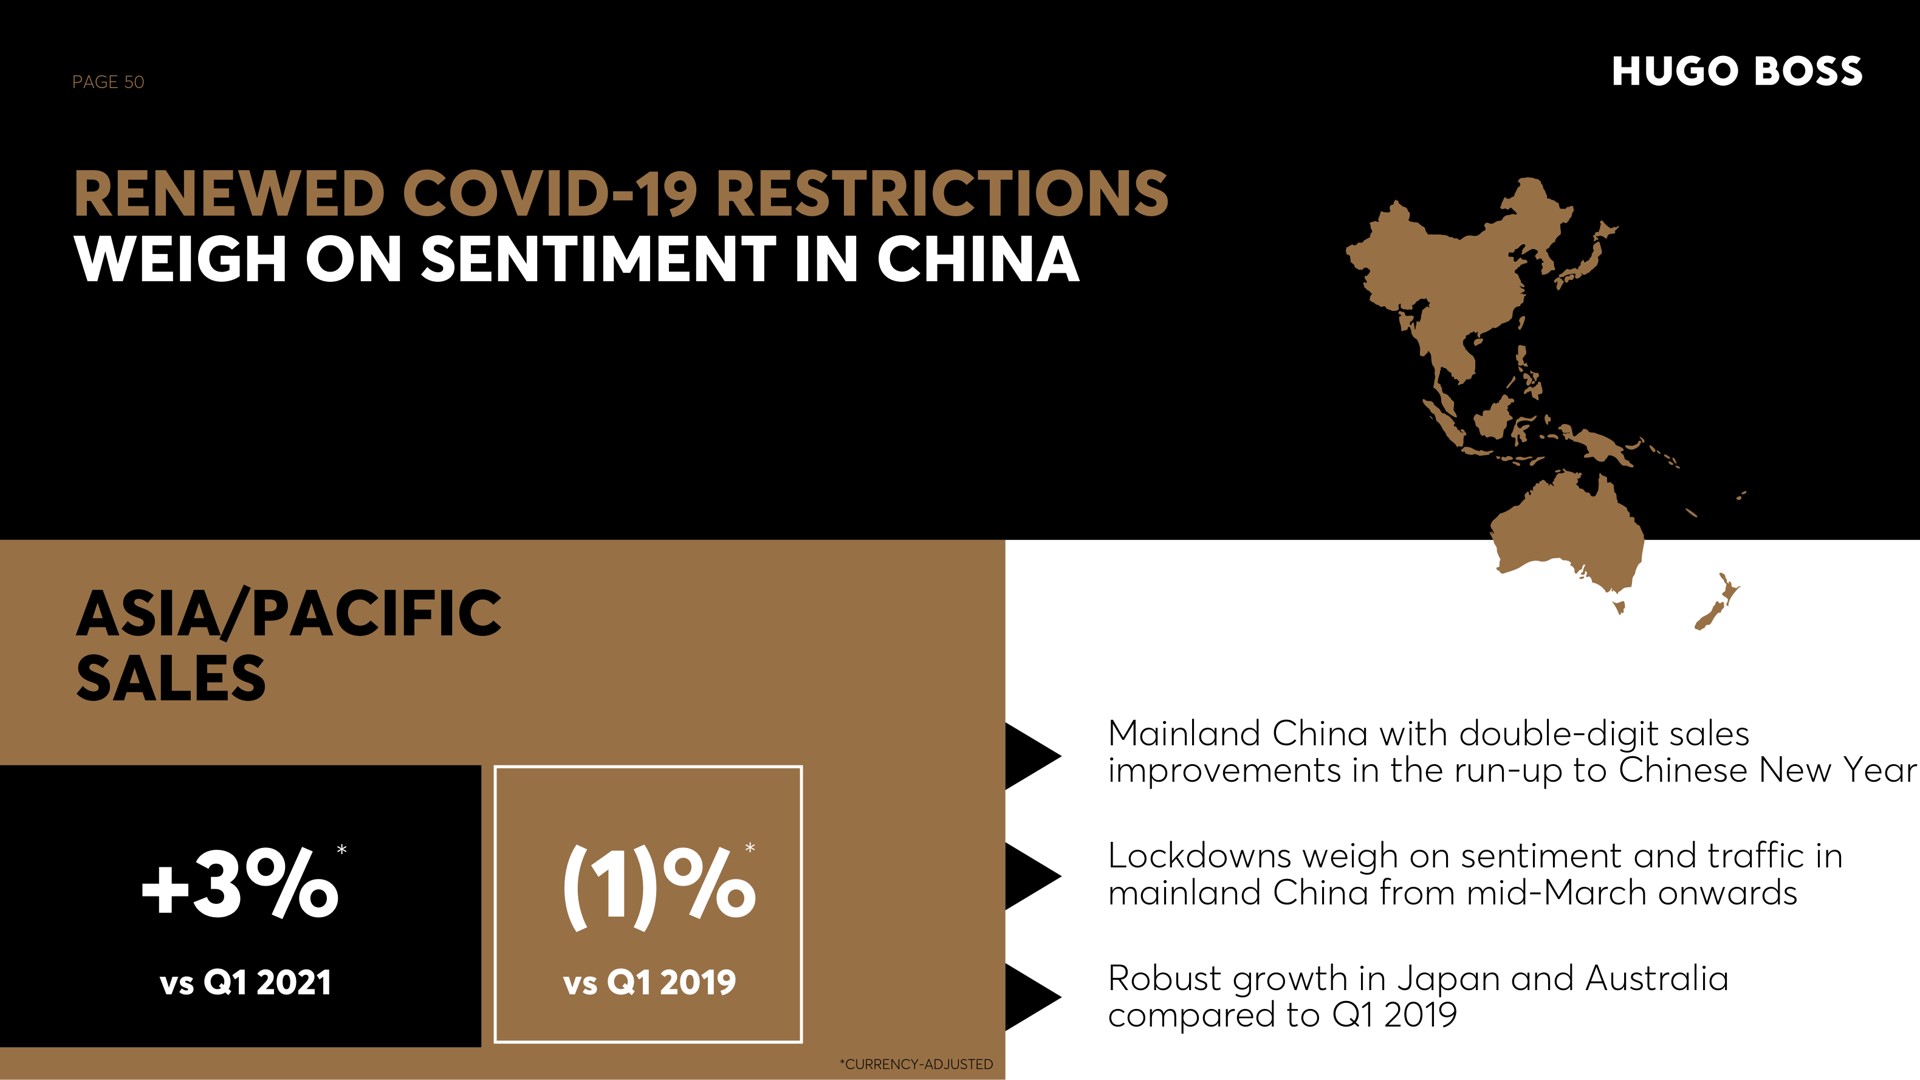 page renewed covid restrictions weigh on sentiment in china pacific sales china with double digit sales improvements in the run up to new year weigh on sentiment and traffic in china from mid march onwards robust growth in japan and compared to | Hugo Boss